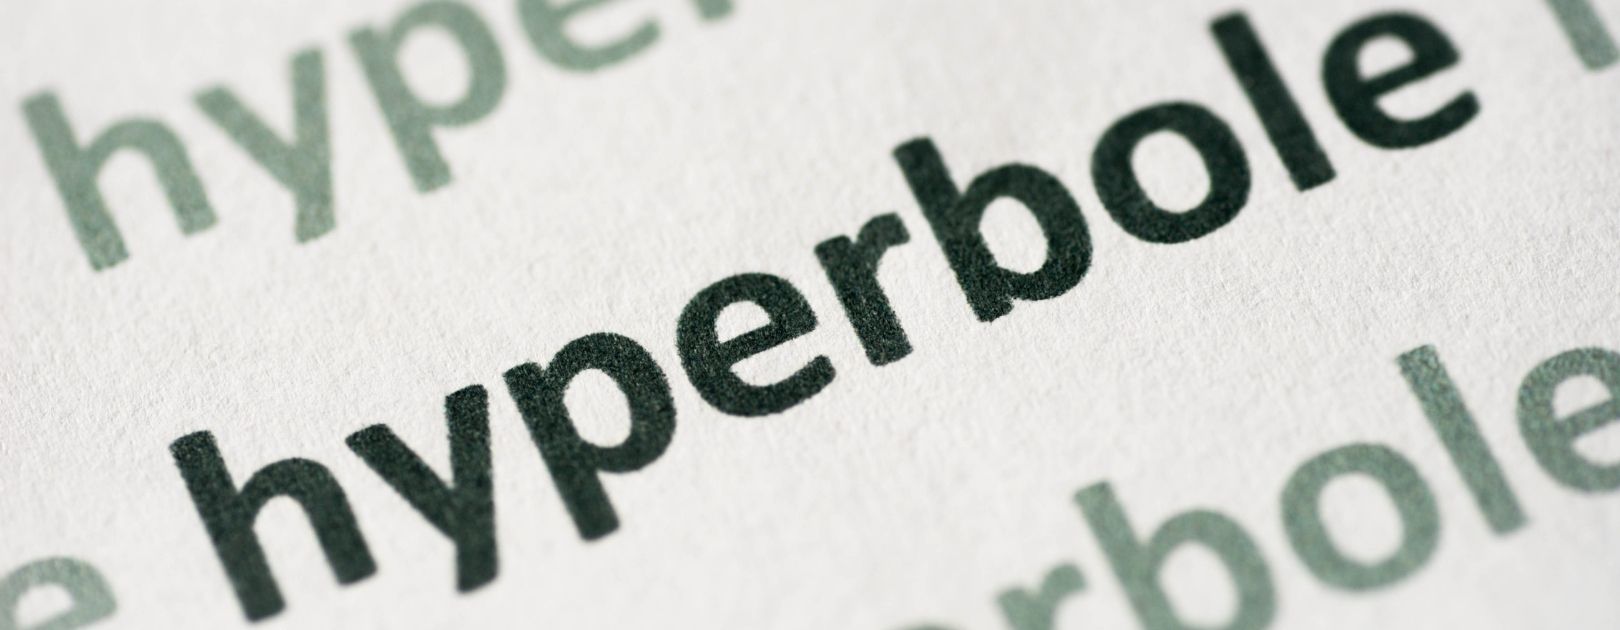 Image Thumbnail for What is Hyperbole? Definition, Sentence, & Examples